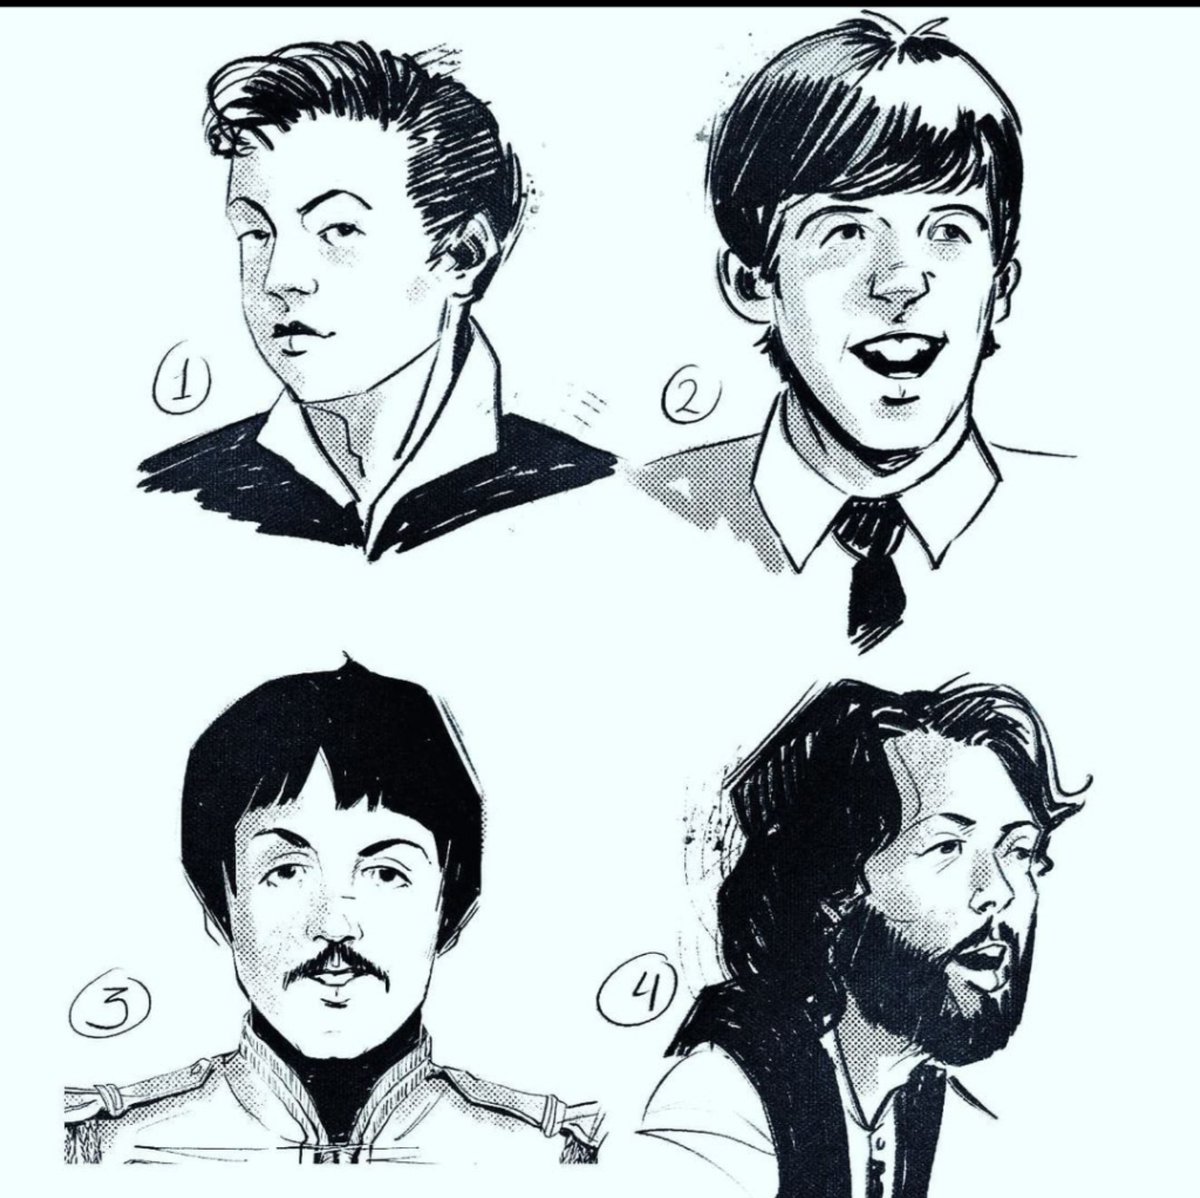 Forgot it was Paul McCartney 's 80th the other day. Whoops. 
#Beatles #PaulMcCartney80